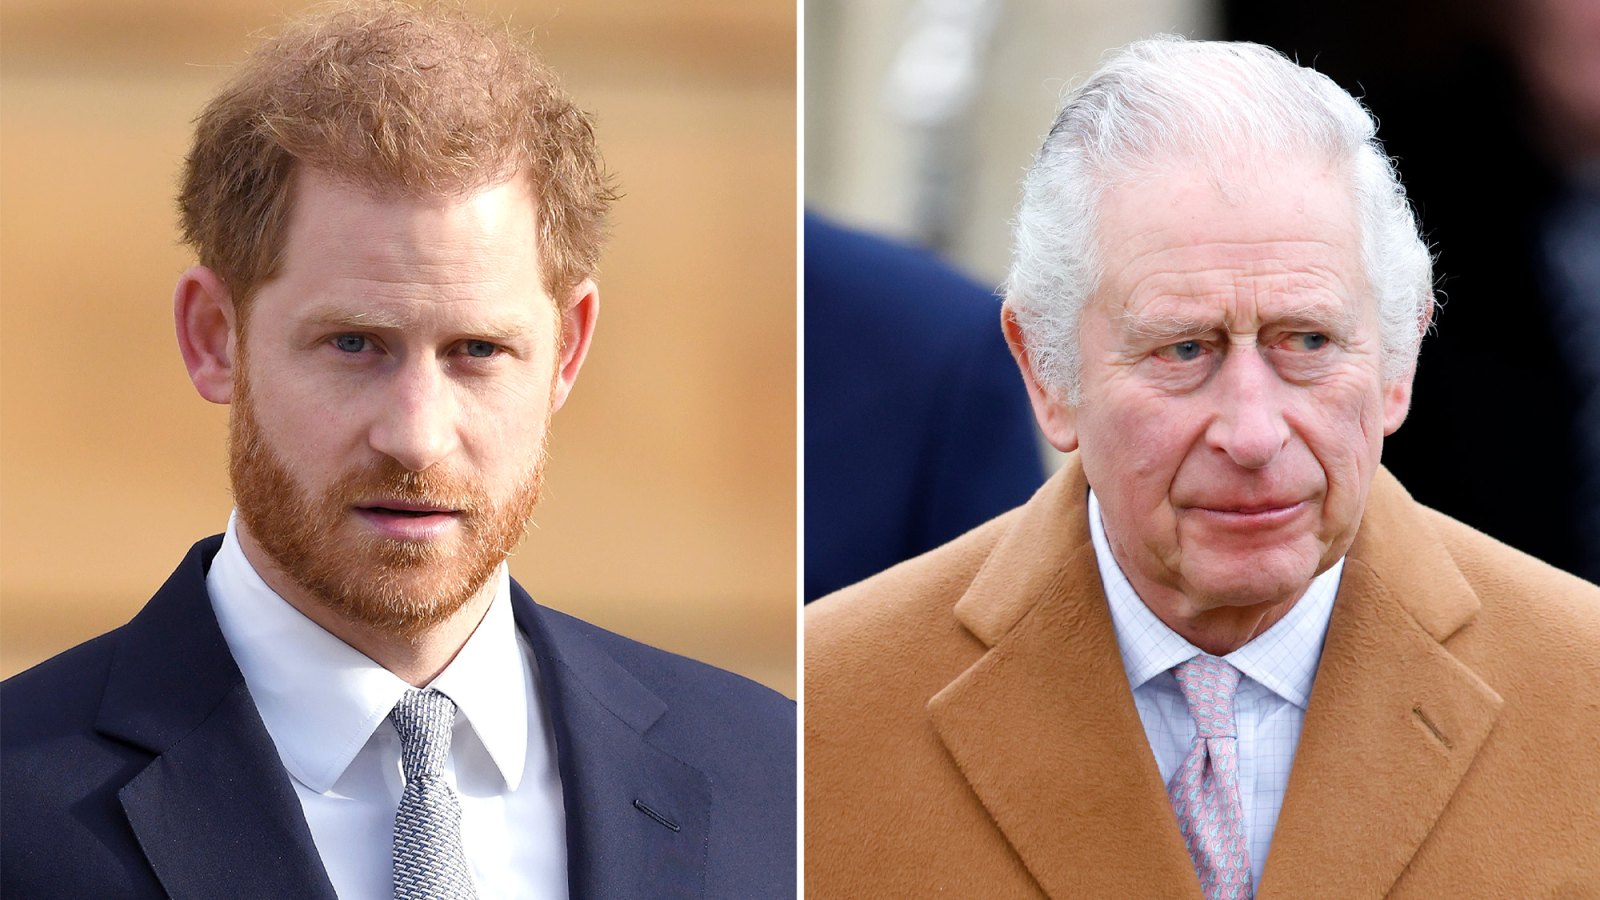 Prince Harry Has Spoken With Dad King Charles III About Cancer Diagnosis